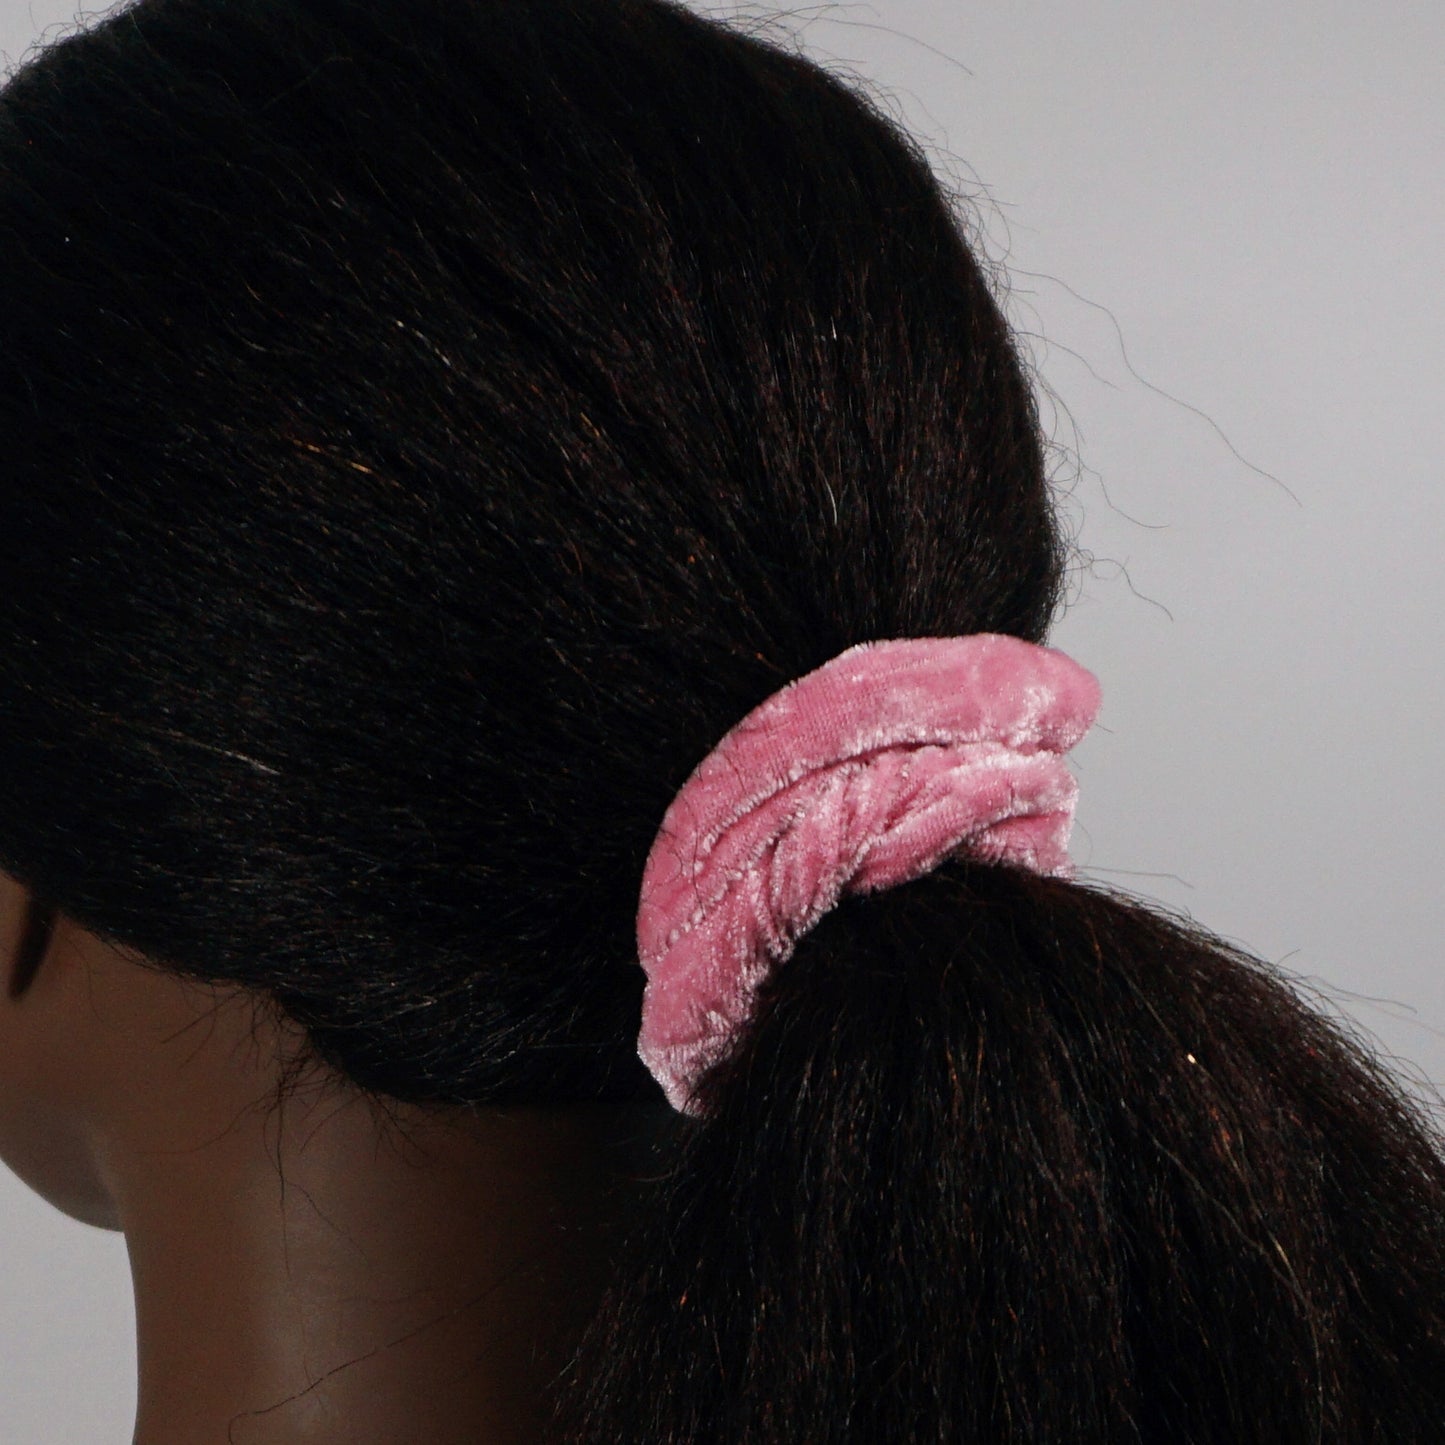 Amelia Beauty Products, Pink Velvet Velvet Scrunchies, 3.5in Diameter, Gentle on Hair, Strong Hold, No Snag, No Dents or Creases. 8 Pack